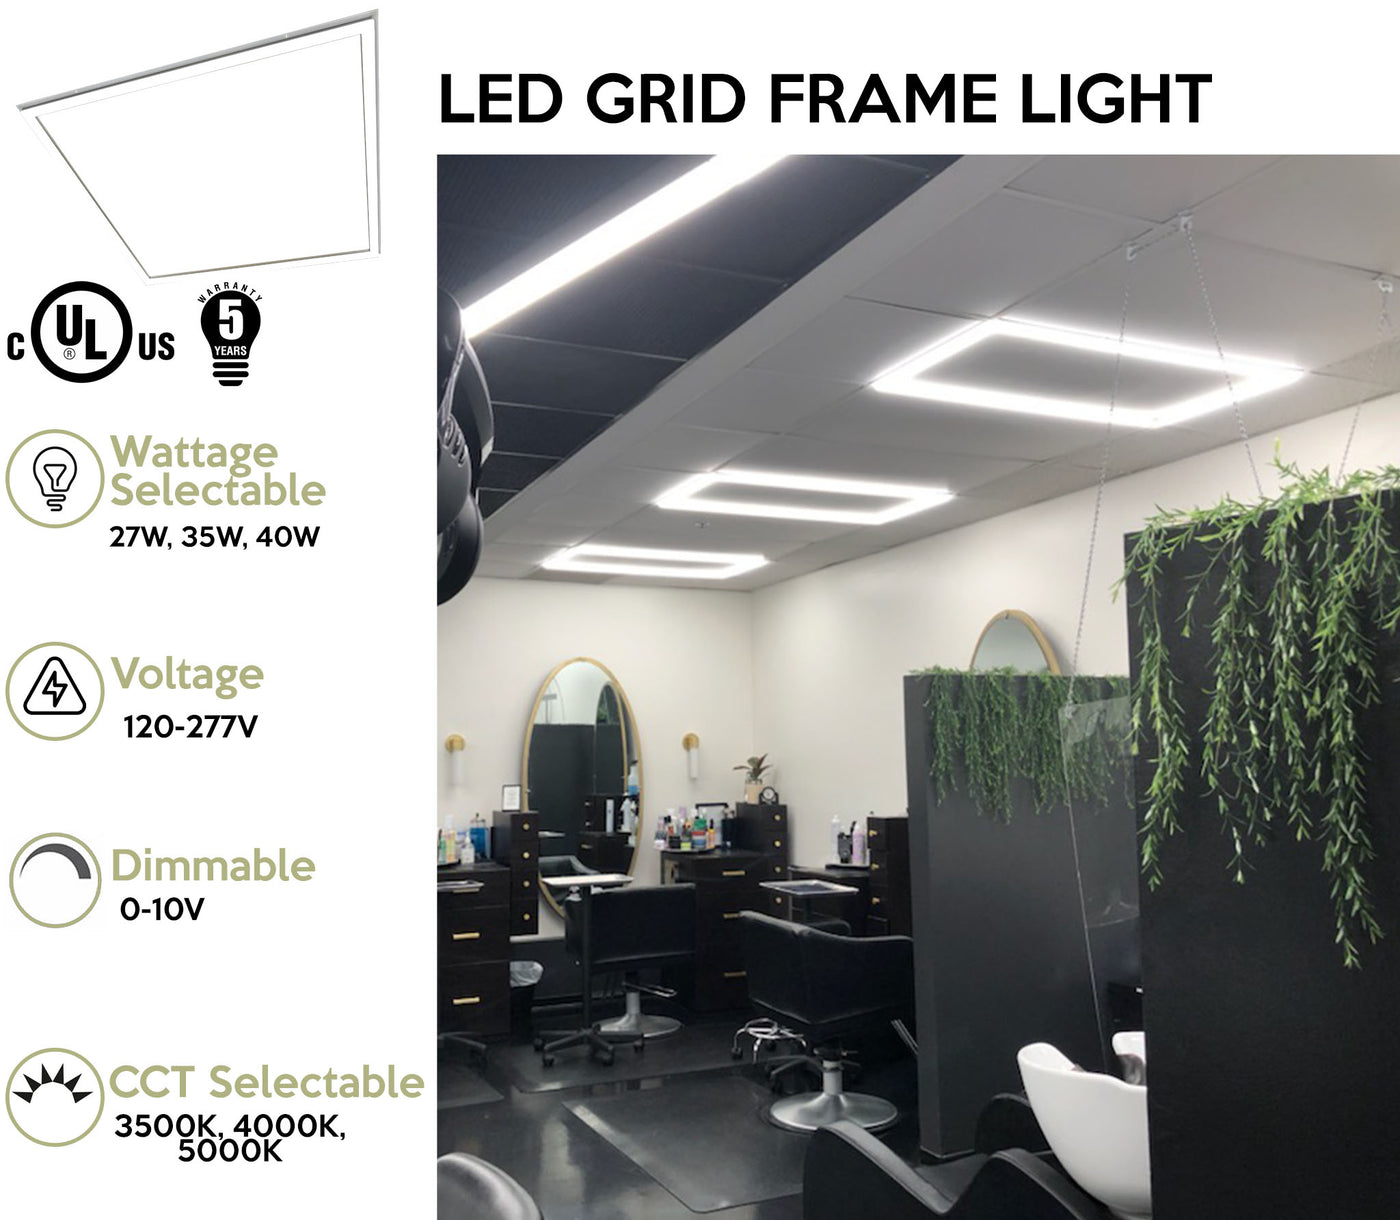 2 x 2 LED Grid Frame Light, 4000 Lumens, Selectable Wattage and CCT, 120-277V